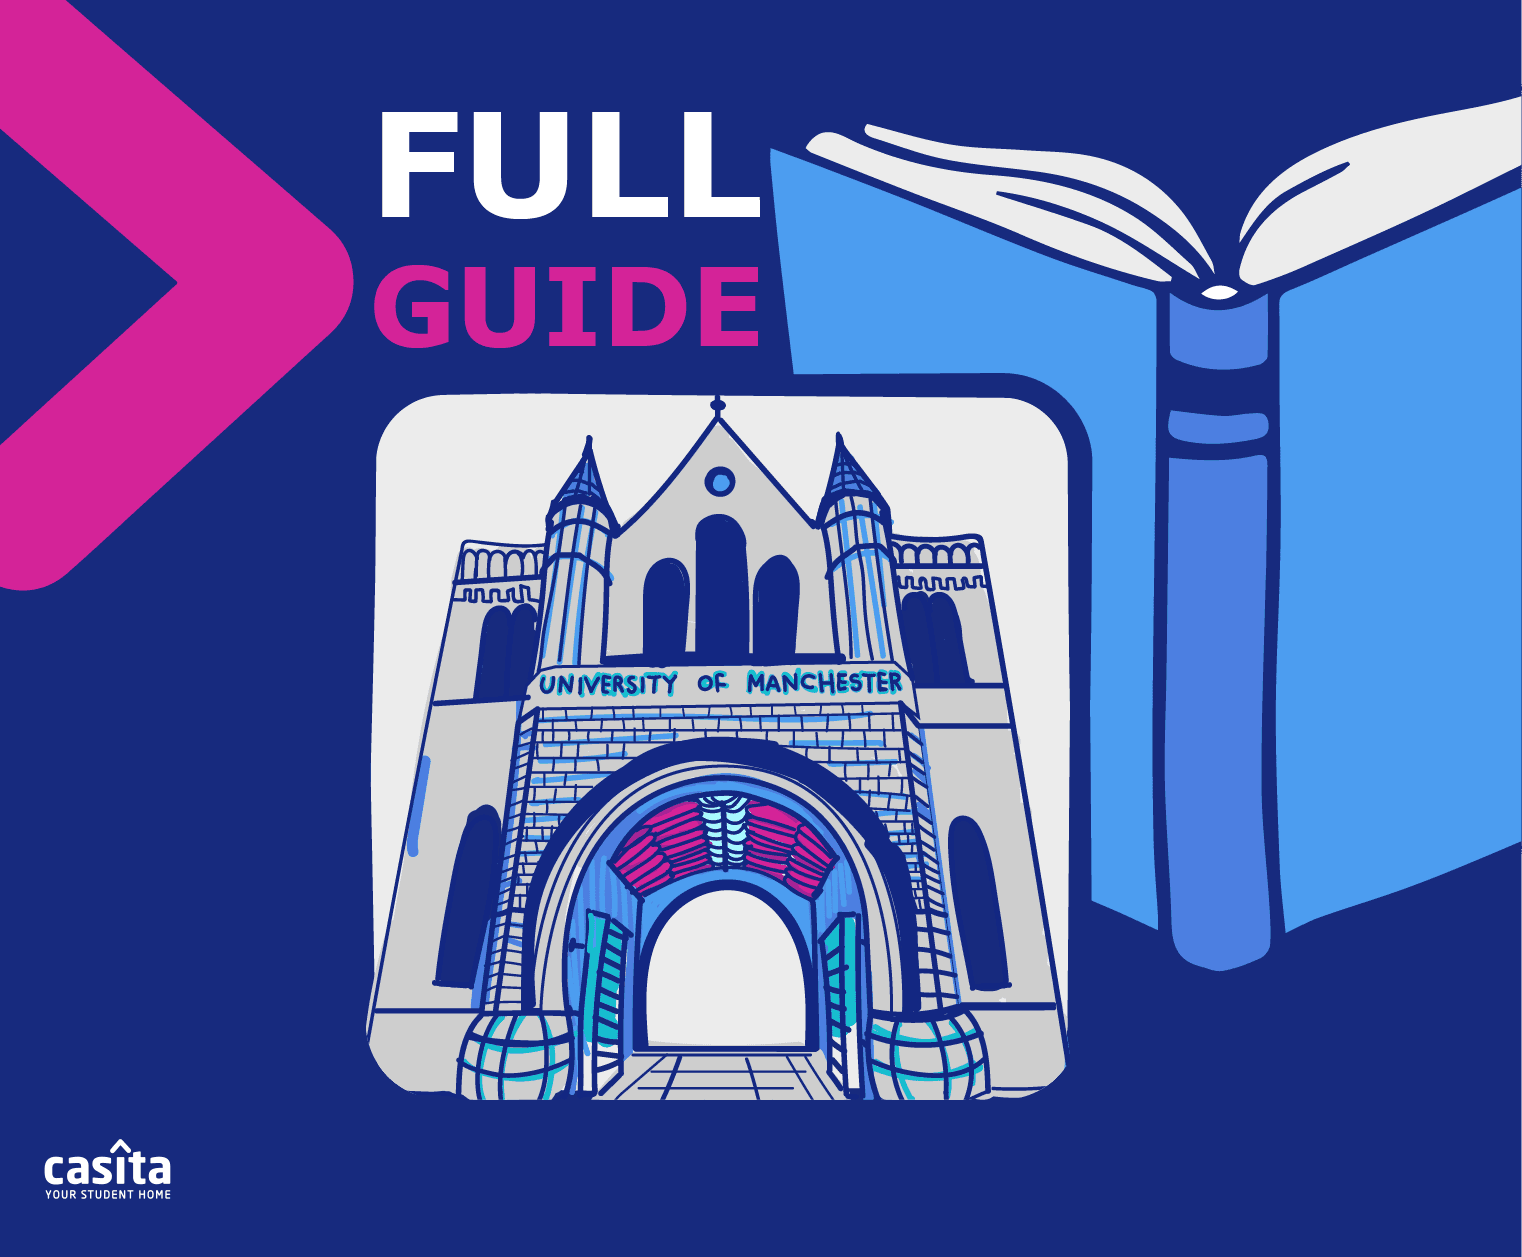 A Full Guide to the University of Manchester